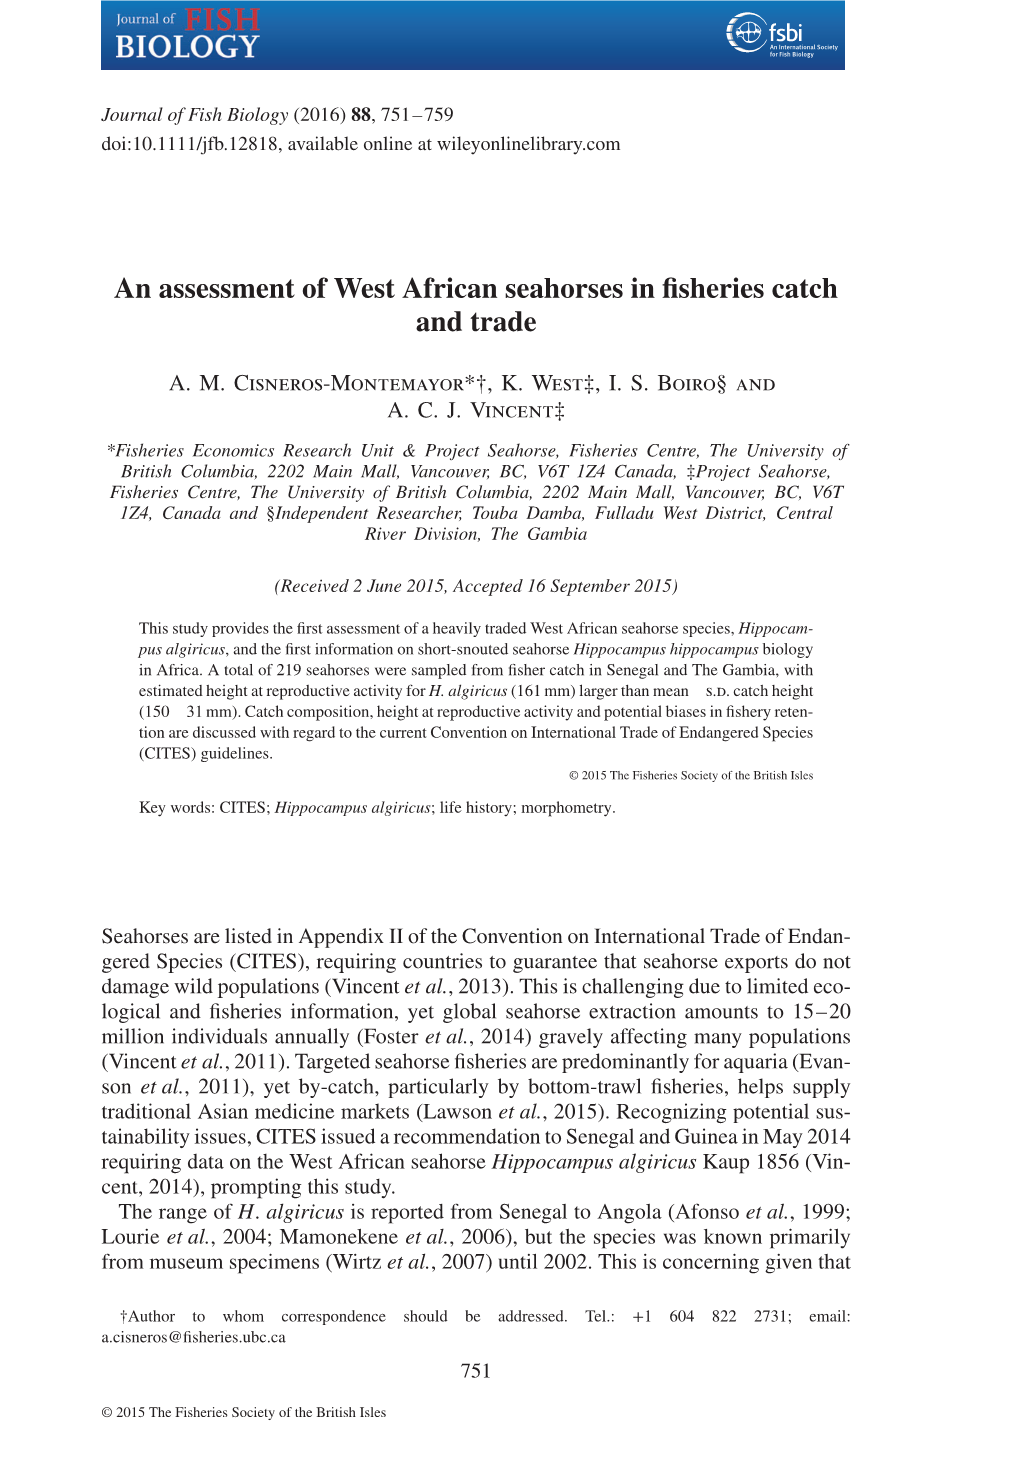 An Assessment of West African Seahorses in Fisheries Catch and Trade